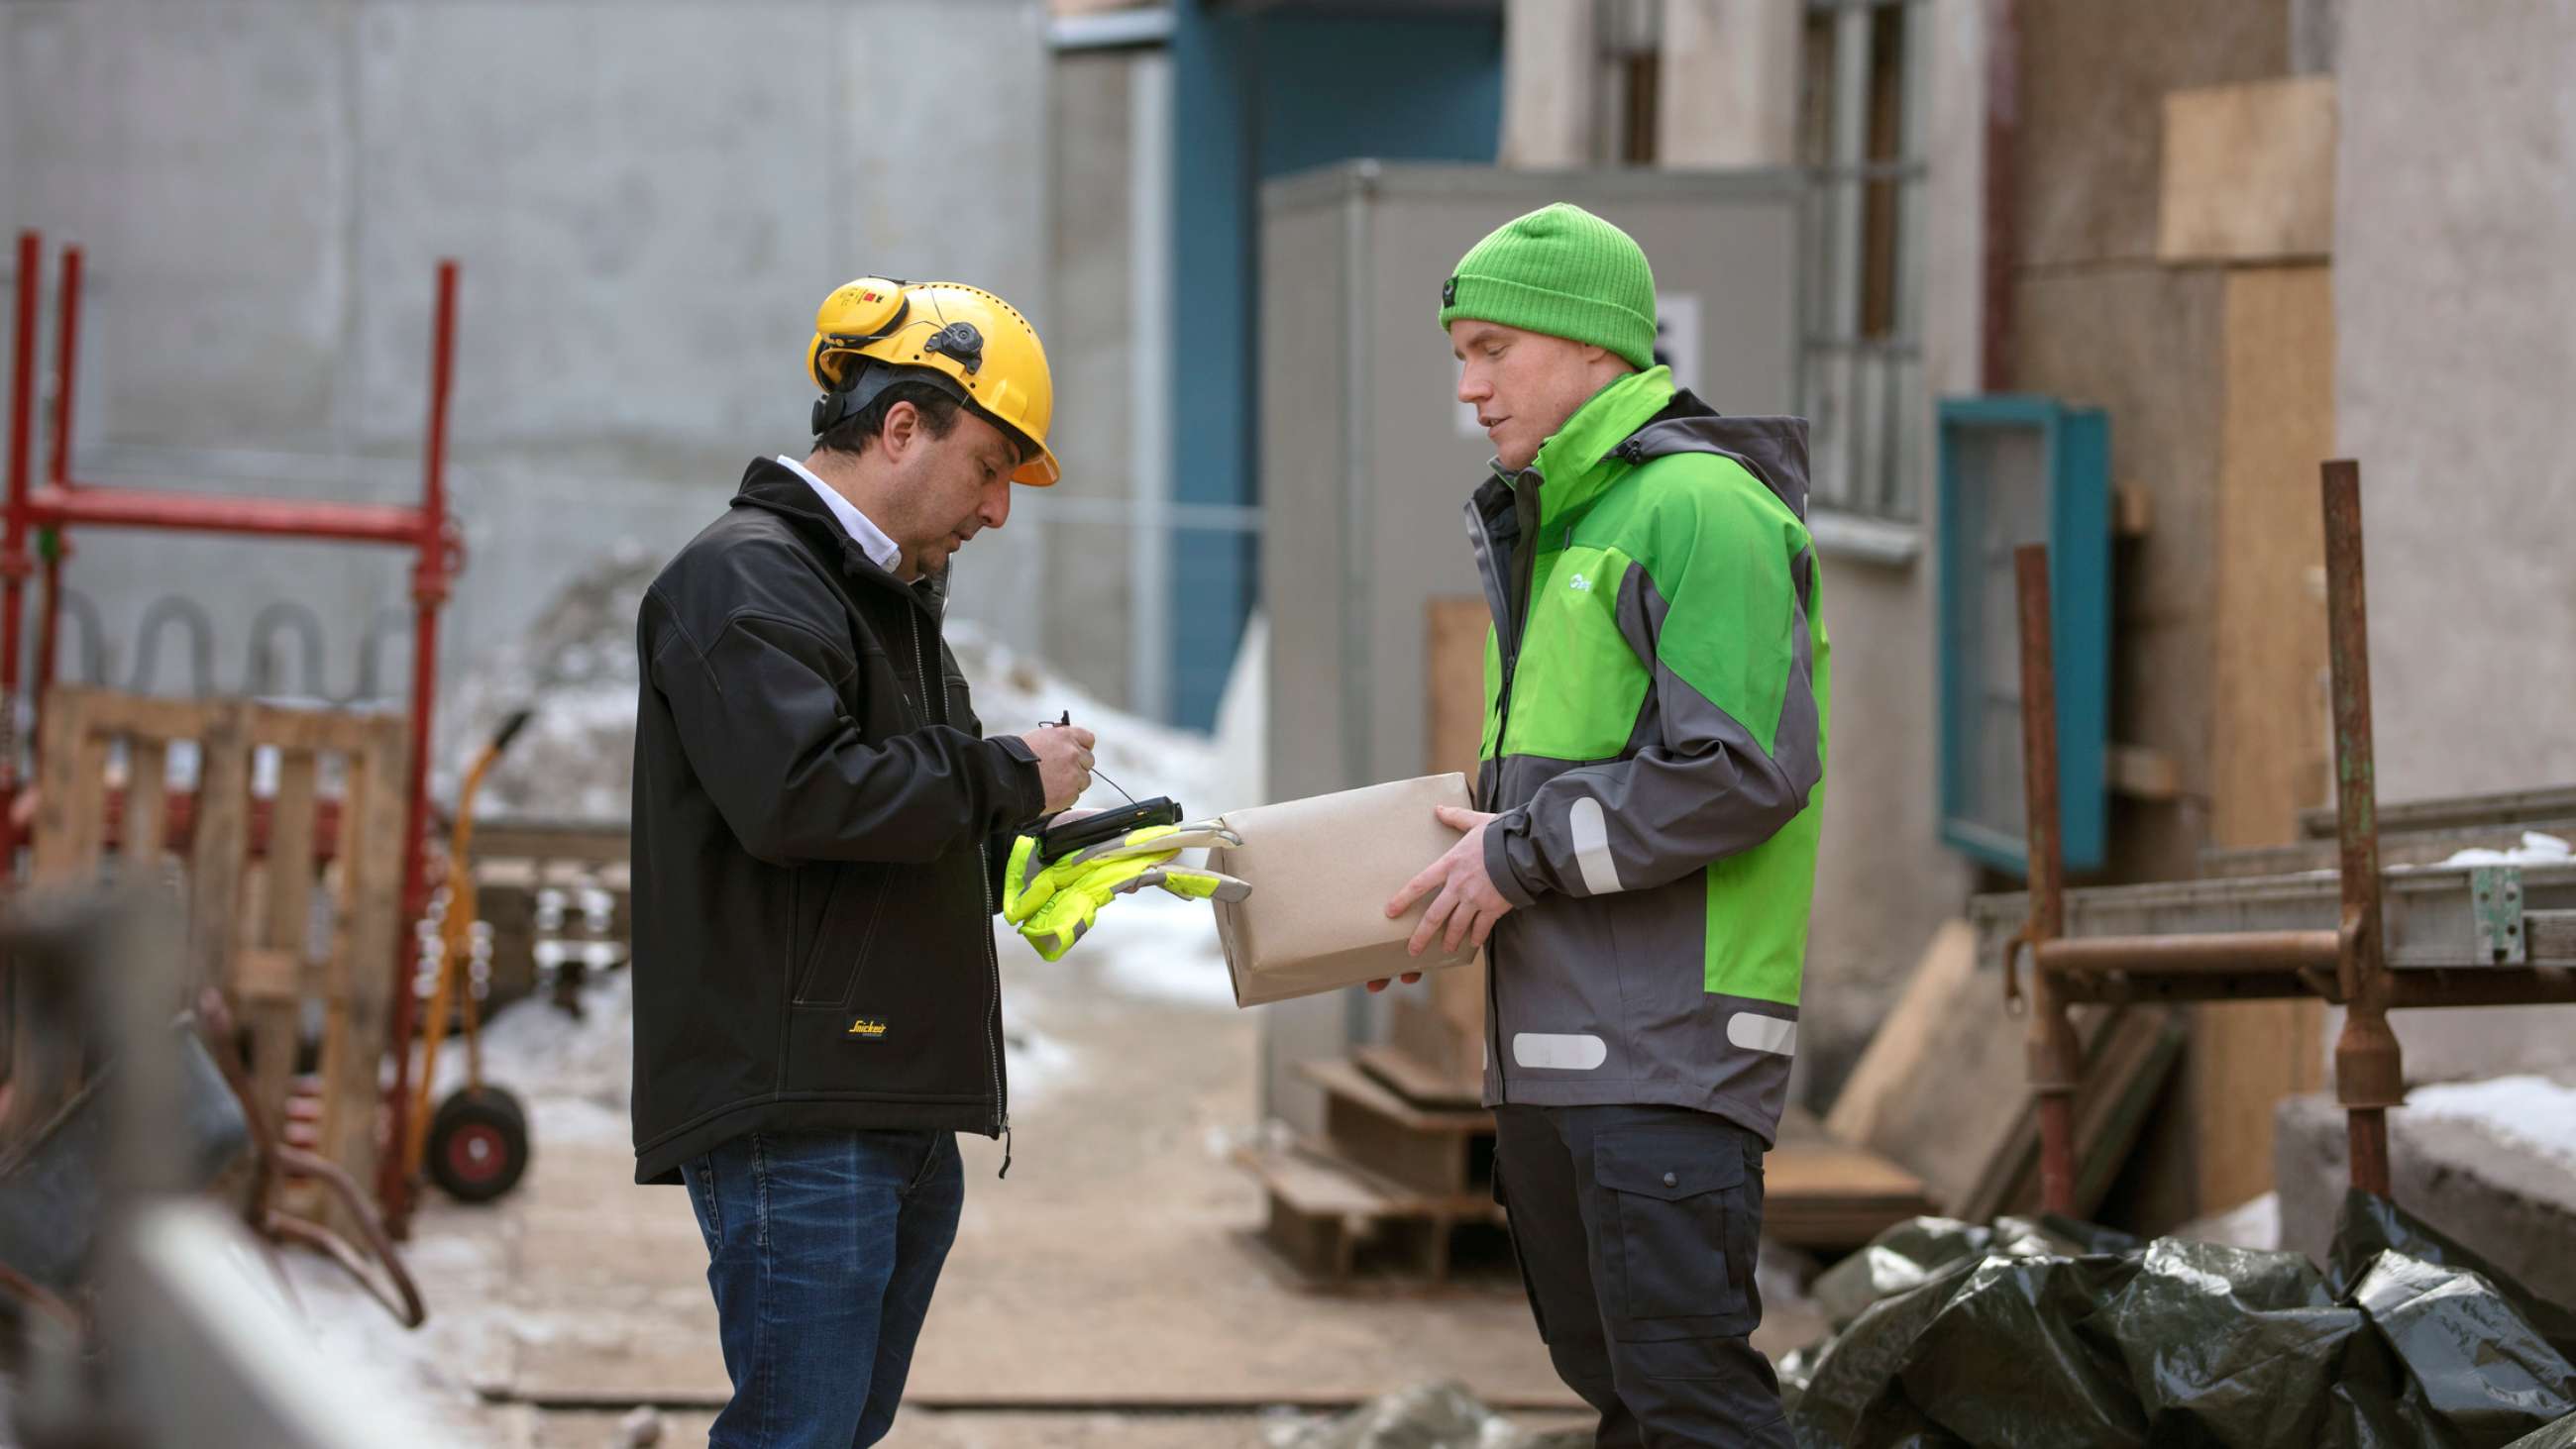 A Bring delivery man delivering a parcel at a construction area